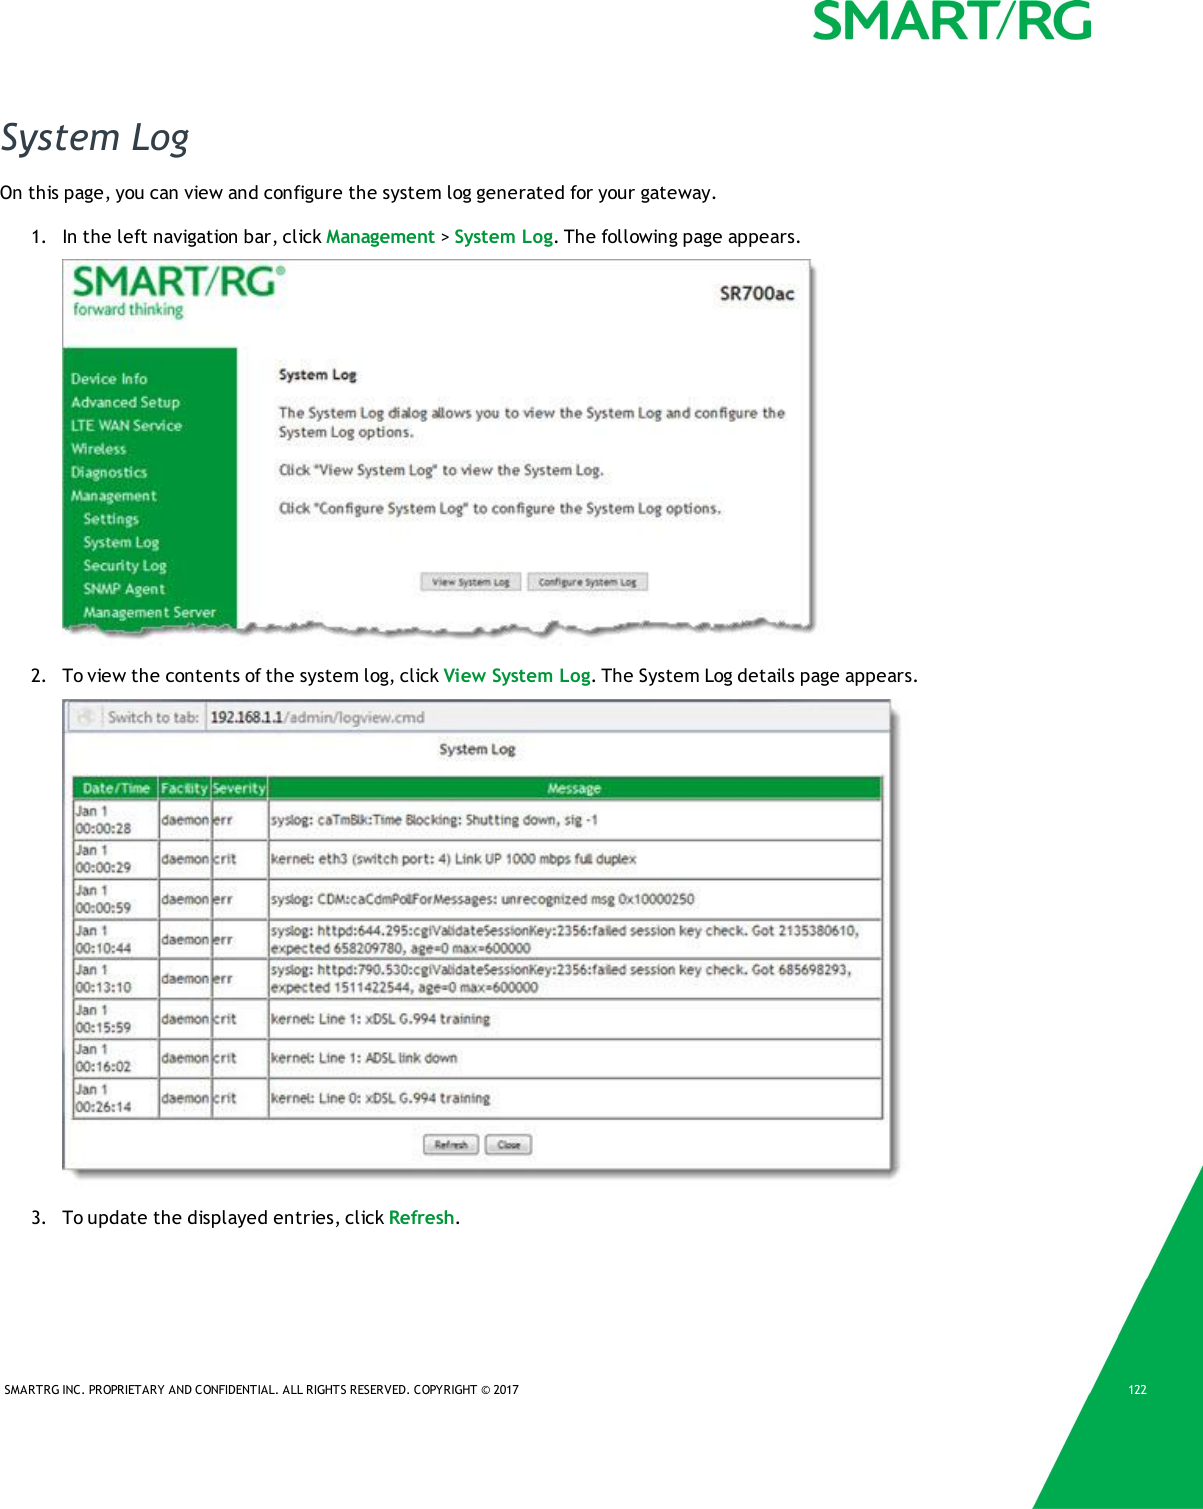 SMARTRG INC. PROPRIETARY AND CONFIDENTIAL. ALL RIGHTS RESERVED. COPYRIGHT © 2017 122System LogOn this page, you can view and configure the system log generated for your gateway.1. In the left navigation bar, click Management &gt;System Log. The following page appears.2. To view the contents of the system log, click View System Log. The System Log details page appears.3. To update the displayed entries, click Refresh.